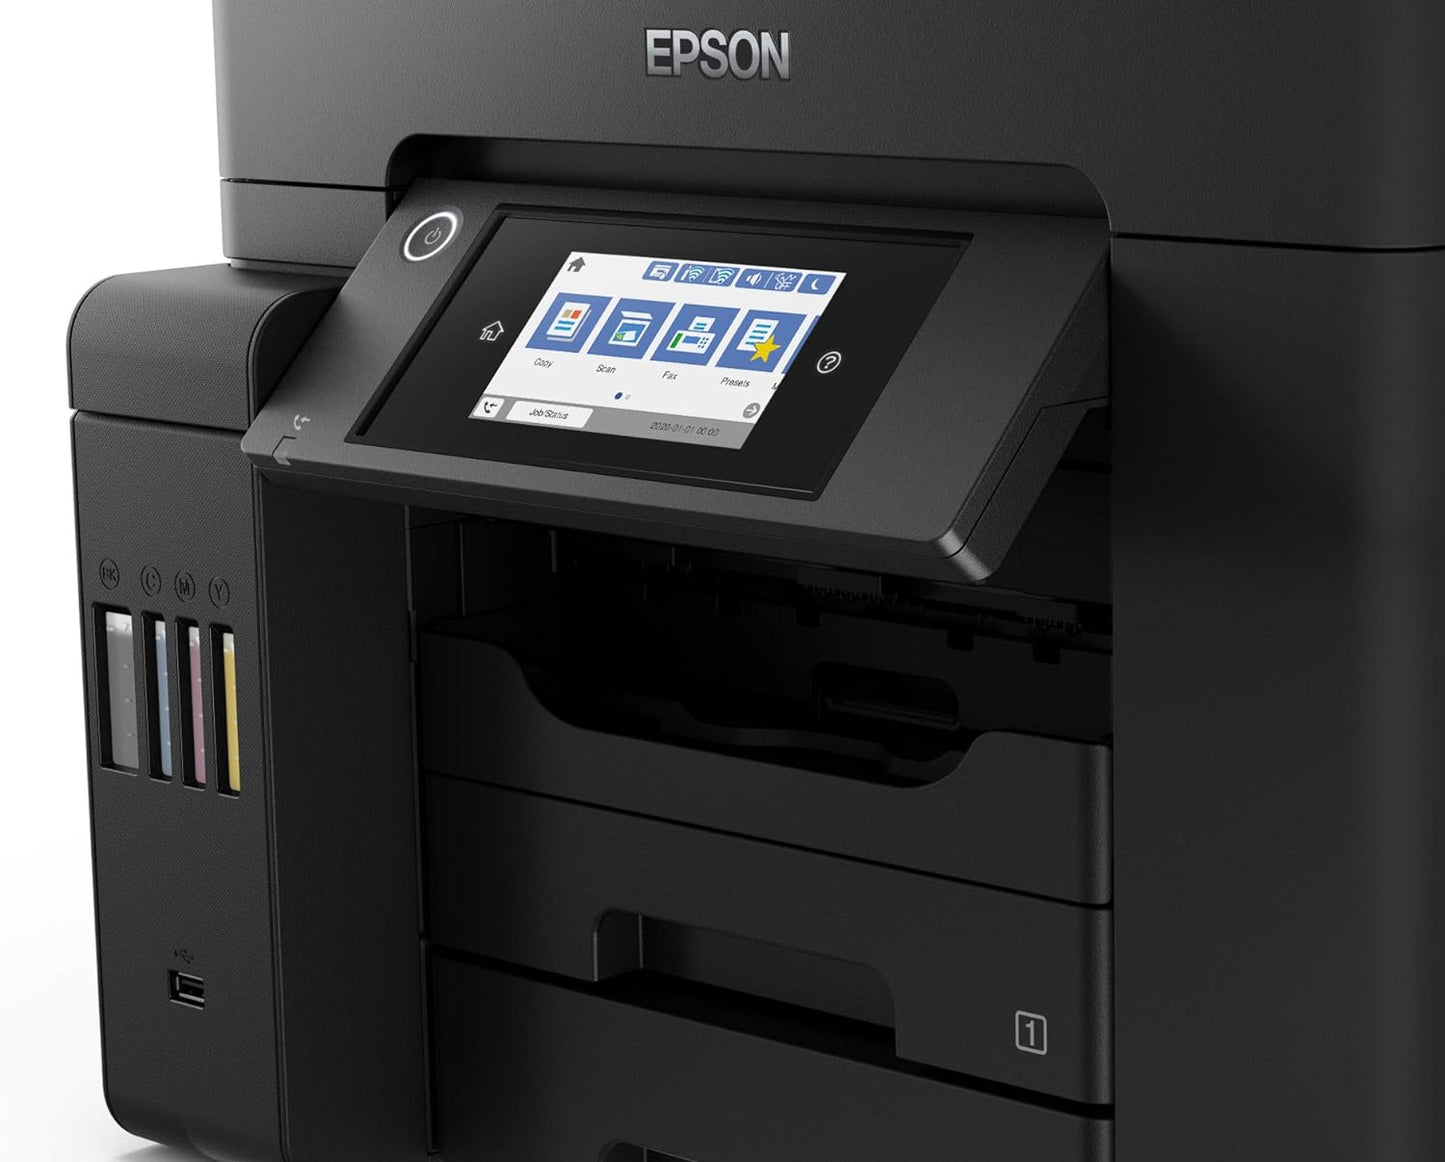 EPSON EcoTank A4 All-in-One 4.3" Touchscreen Wireless Fast Speed Printer